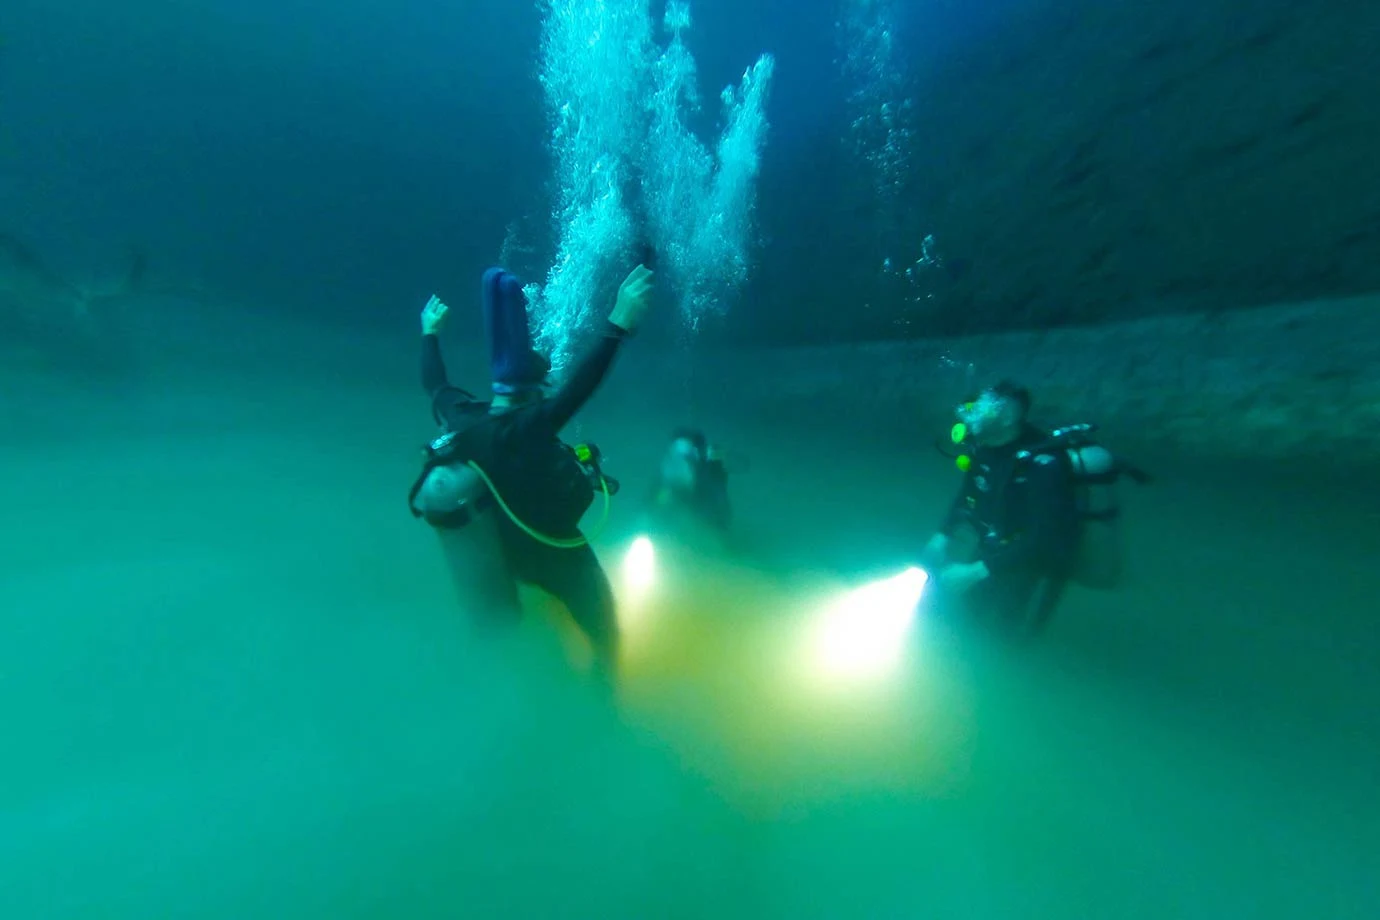 Diving into the hydrogen sulphate clould at Angelita